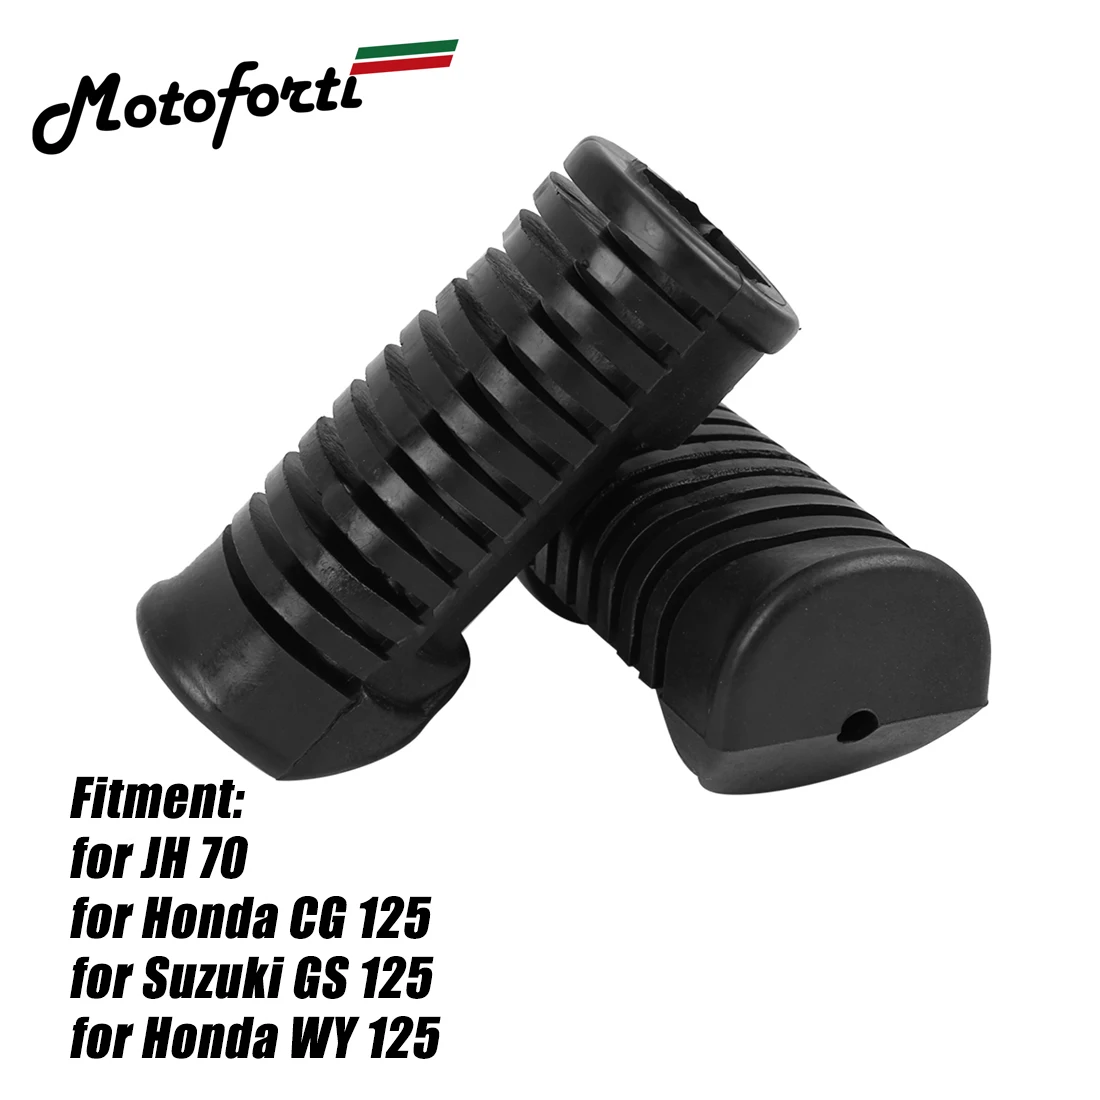 Motoforti Motorcycle Foot Pegs Plate Foot Pedal Cover Footrest Pad for H... - $7.93